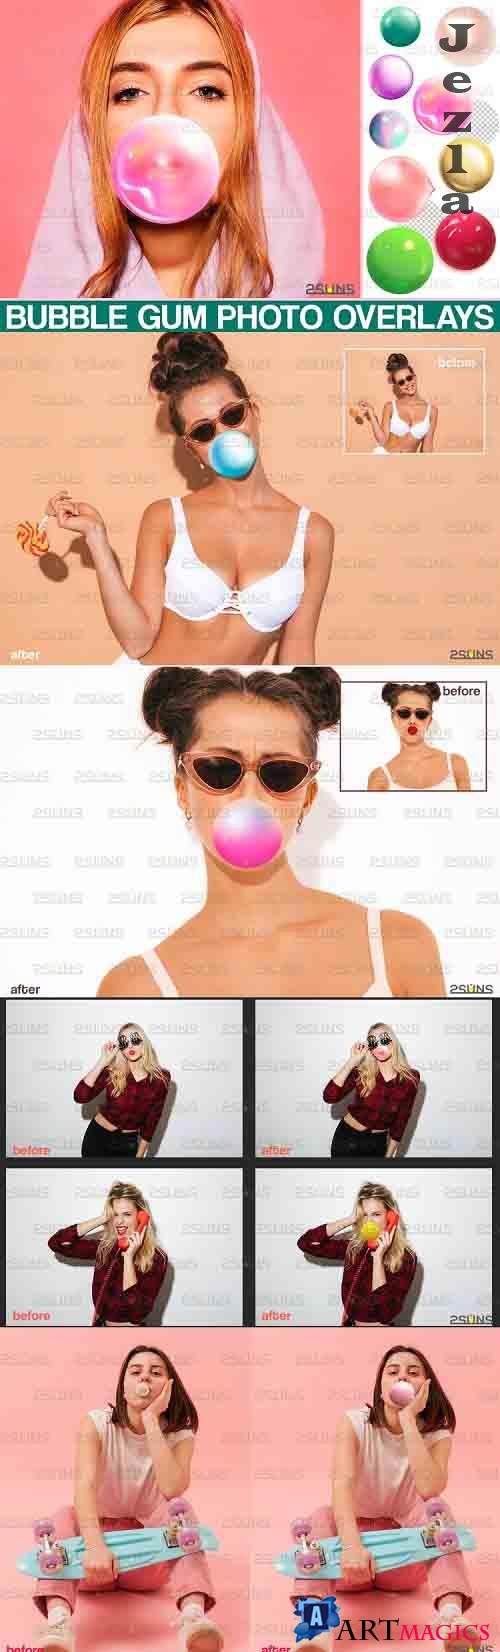 100 Blowing Bubble Gum Photo overlays - 665359